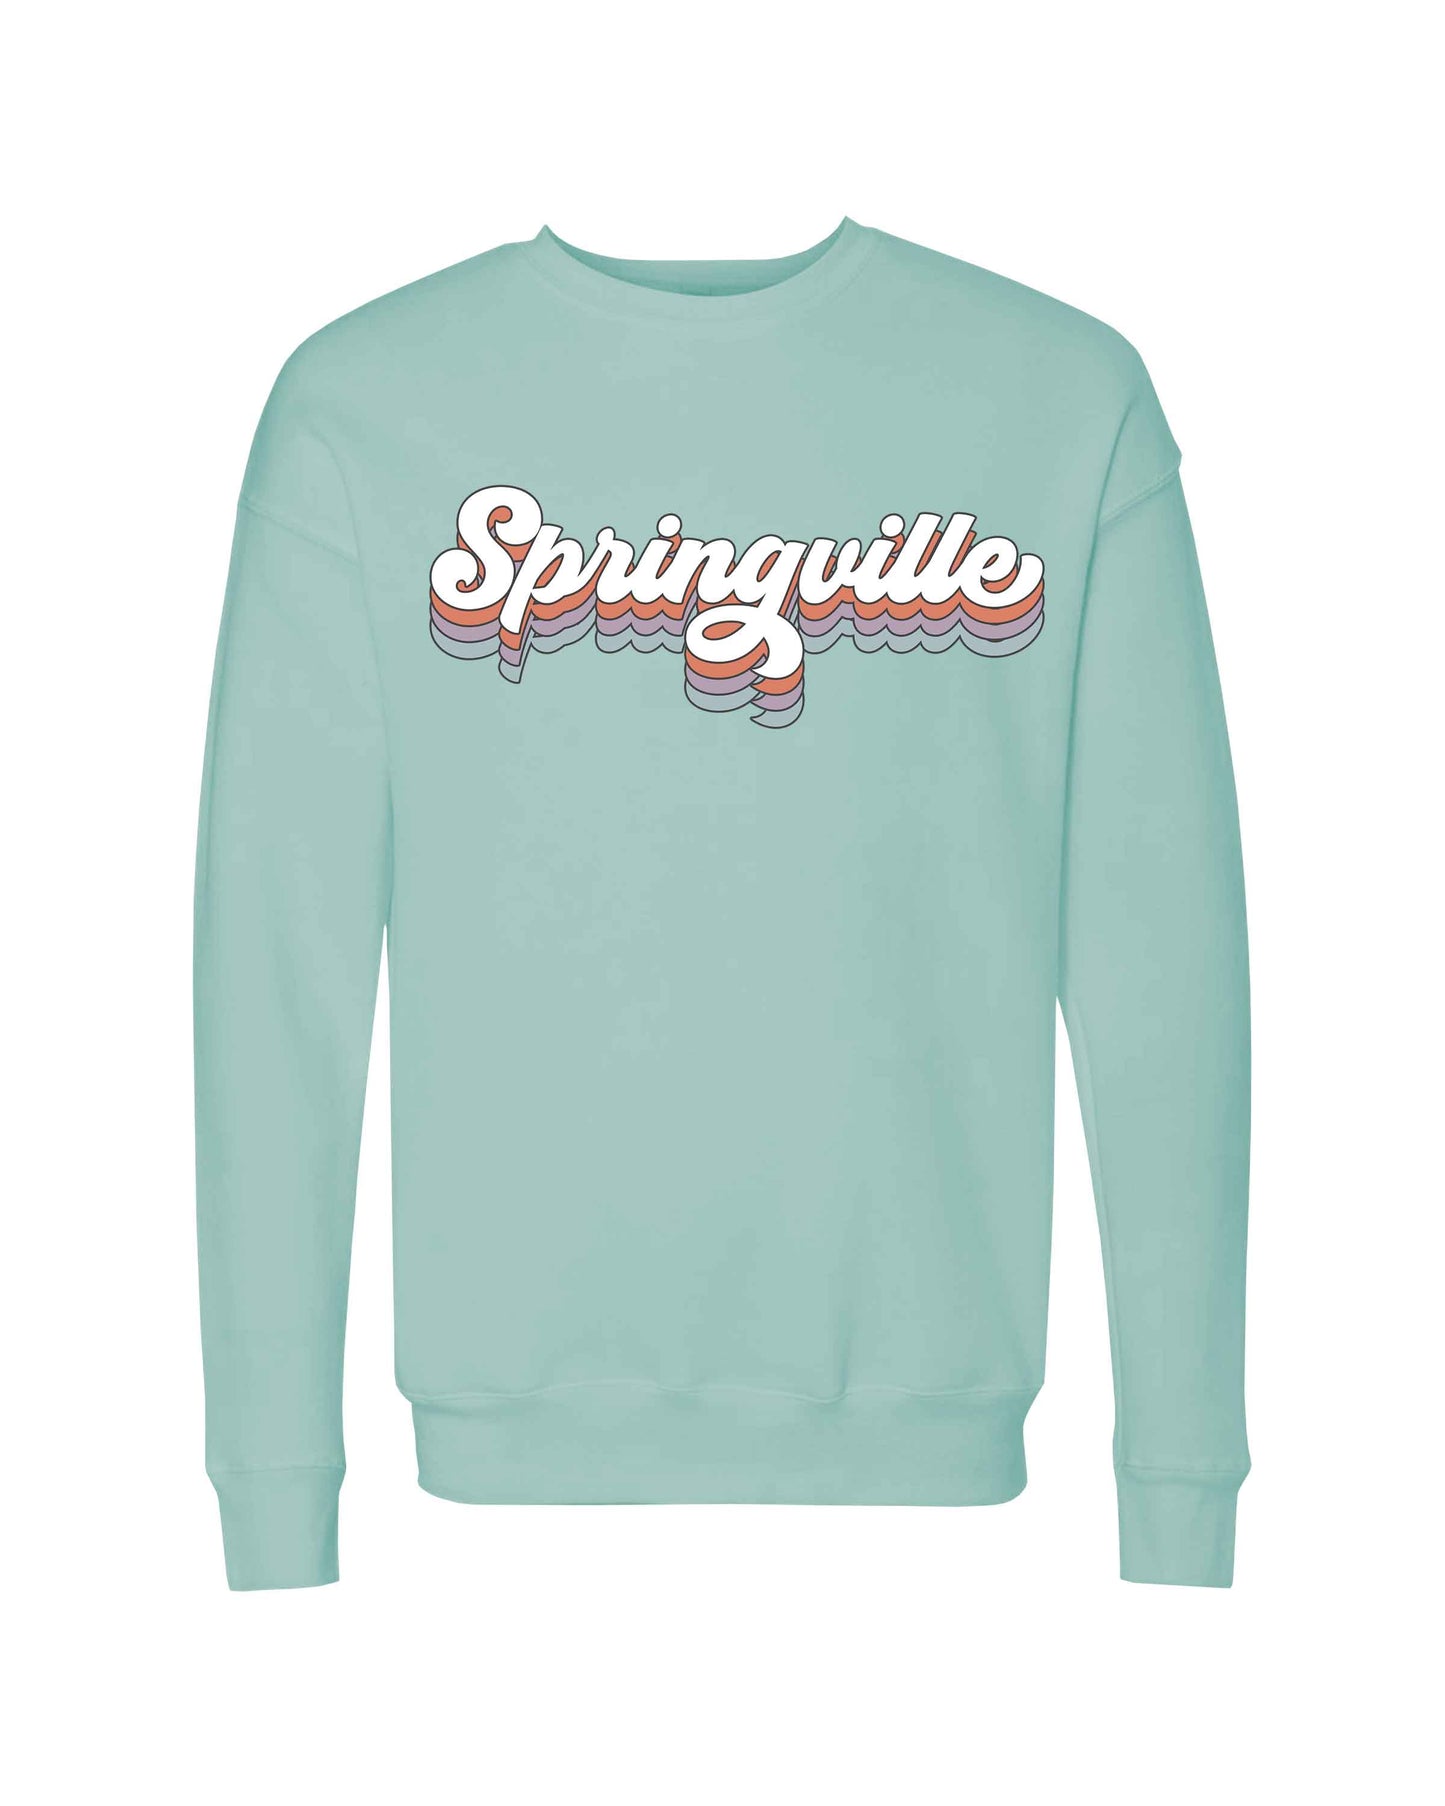 Customizable Groovy | Adult Pullover-Adult Pullover-Sister Shirts-Sister Shirts, Cute & Custom Tees for Mama & Littles in Trussville, Alabama.